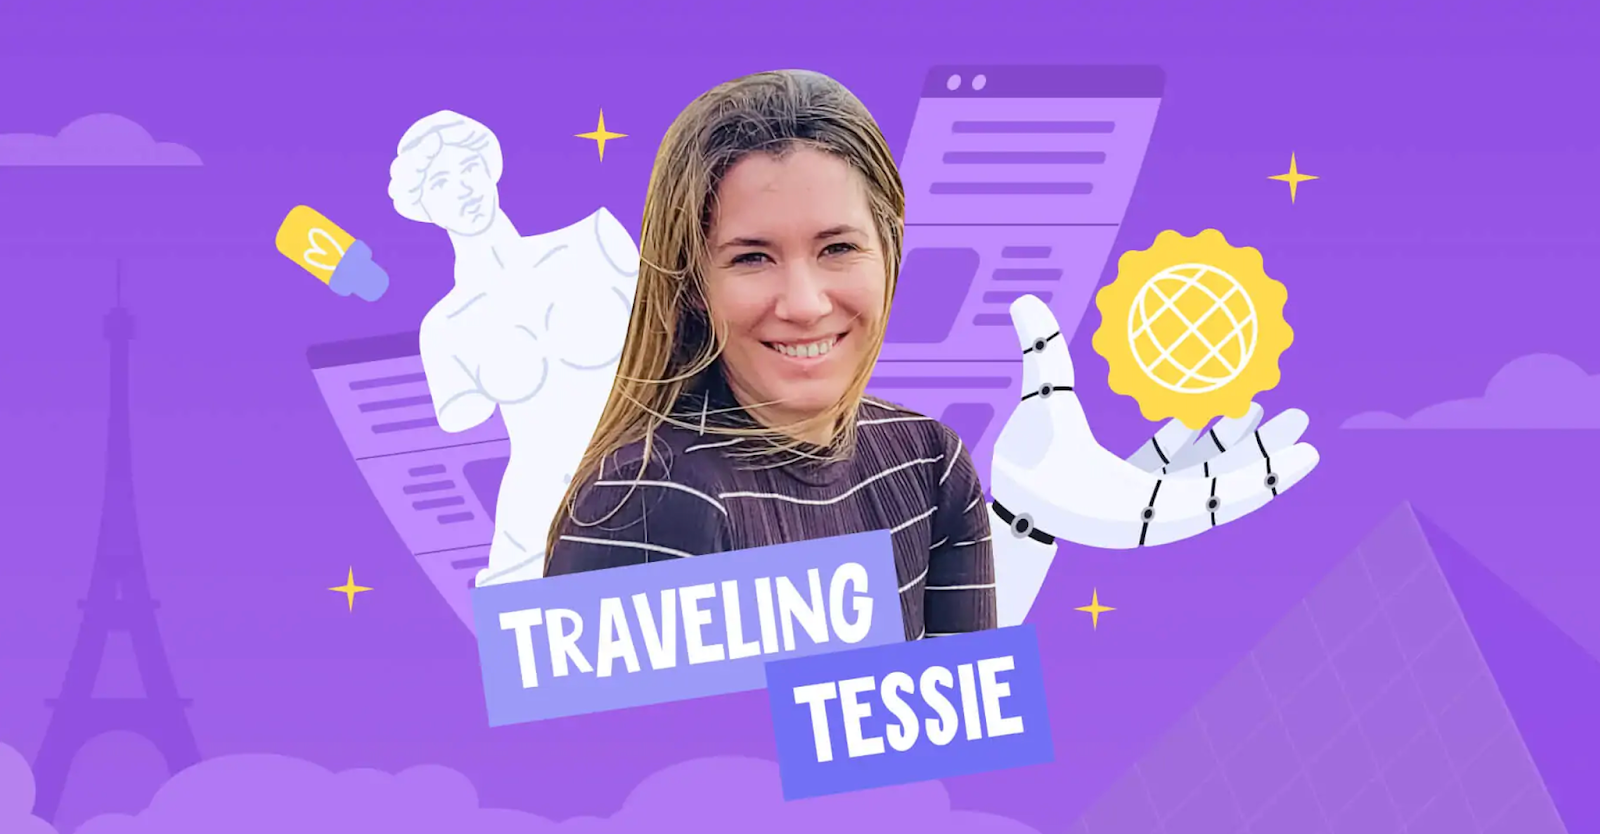 Tess from Traveling Tessie smiling on a purple background.